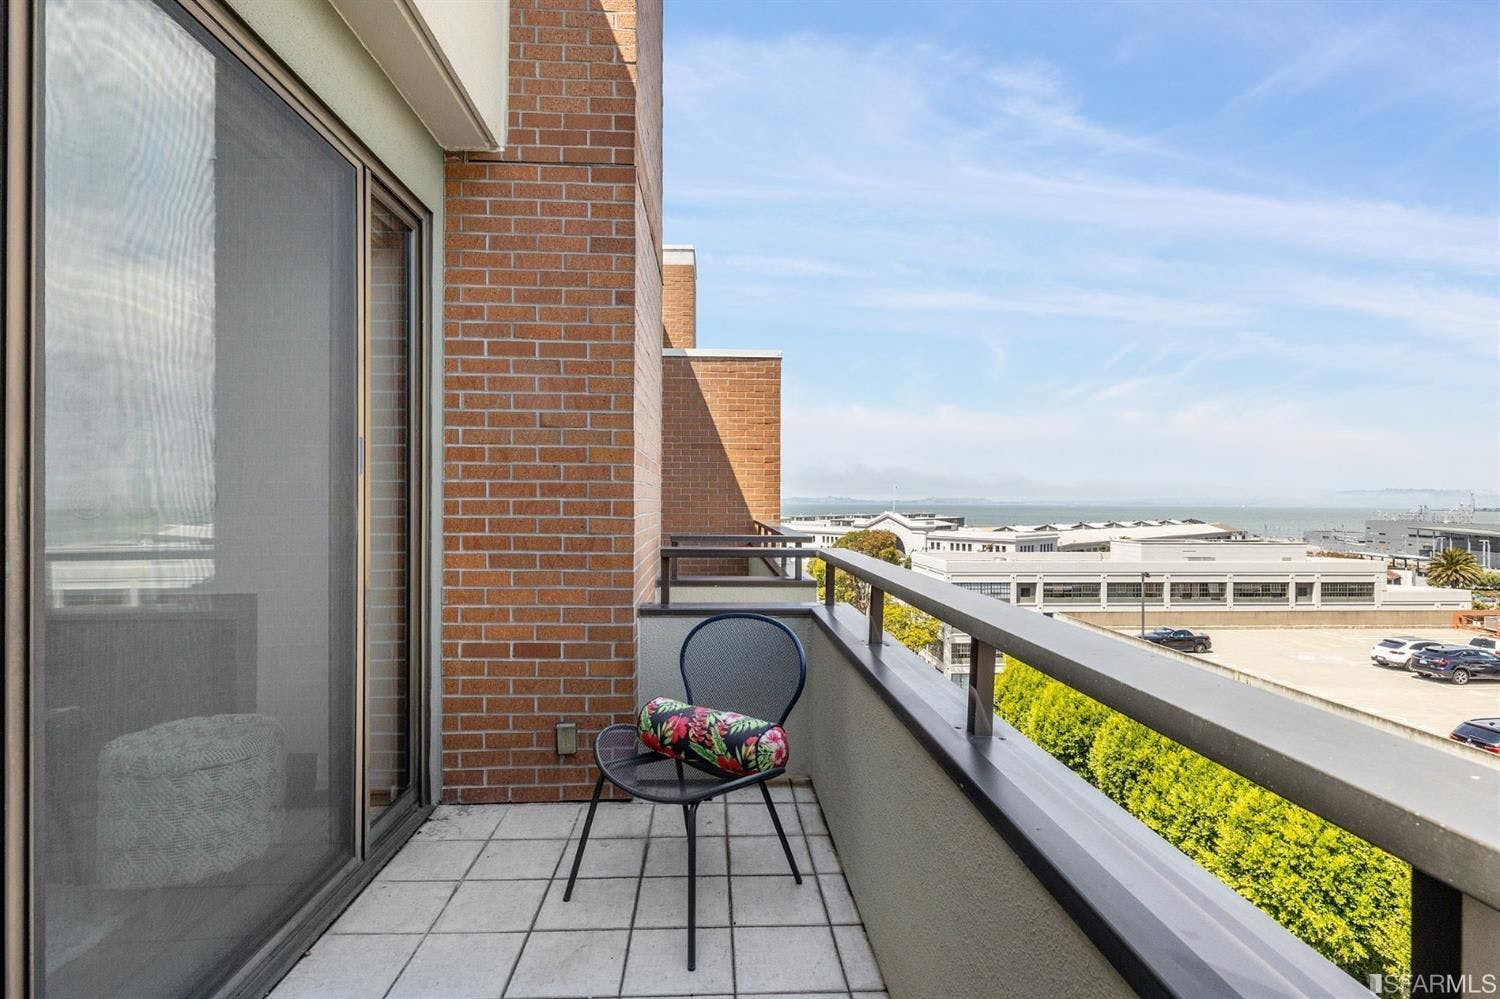 Depending on the residence, certain balconies or private terraces will have views of the bay or bay bridge. The structure also has a rooftop terrace with panoramic views. 